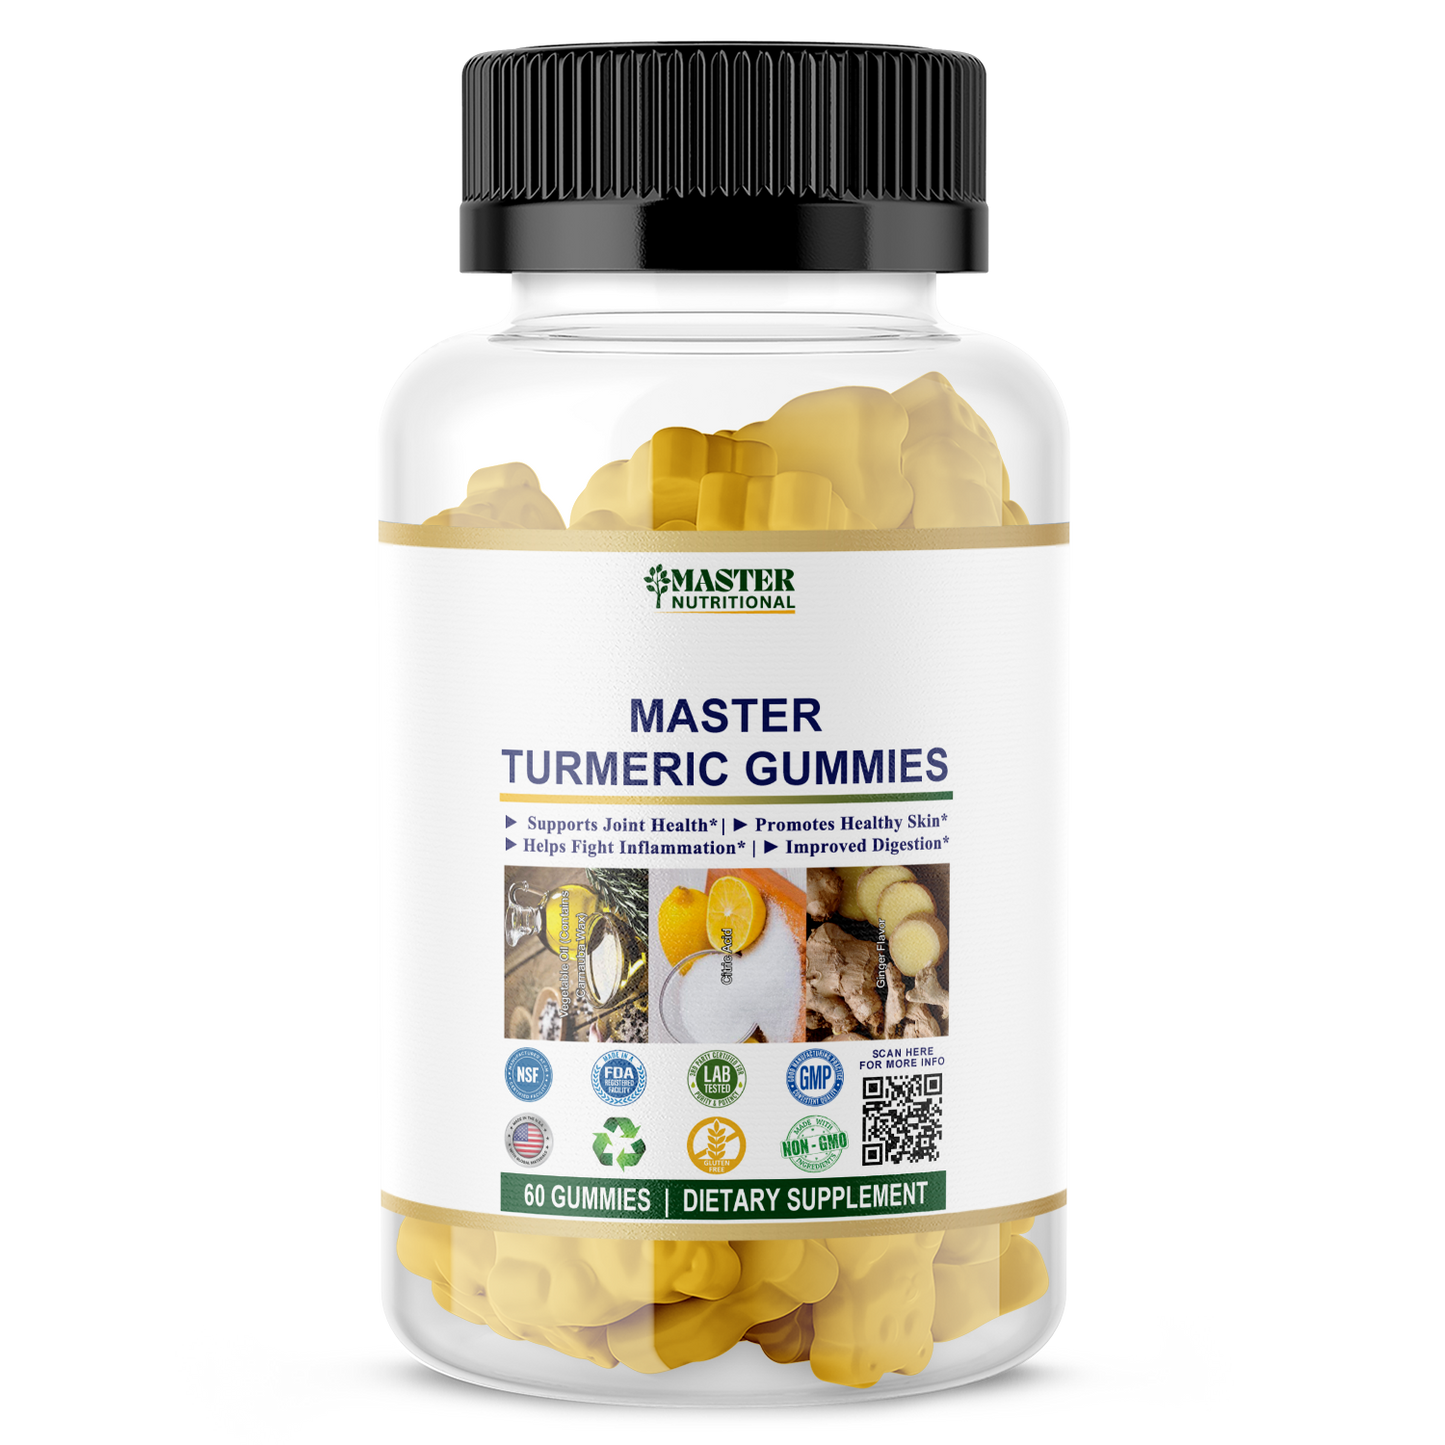 Master Turmeric Gummies: Fix Your Joint Health and Alleviate Inflammation